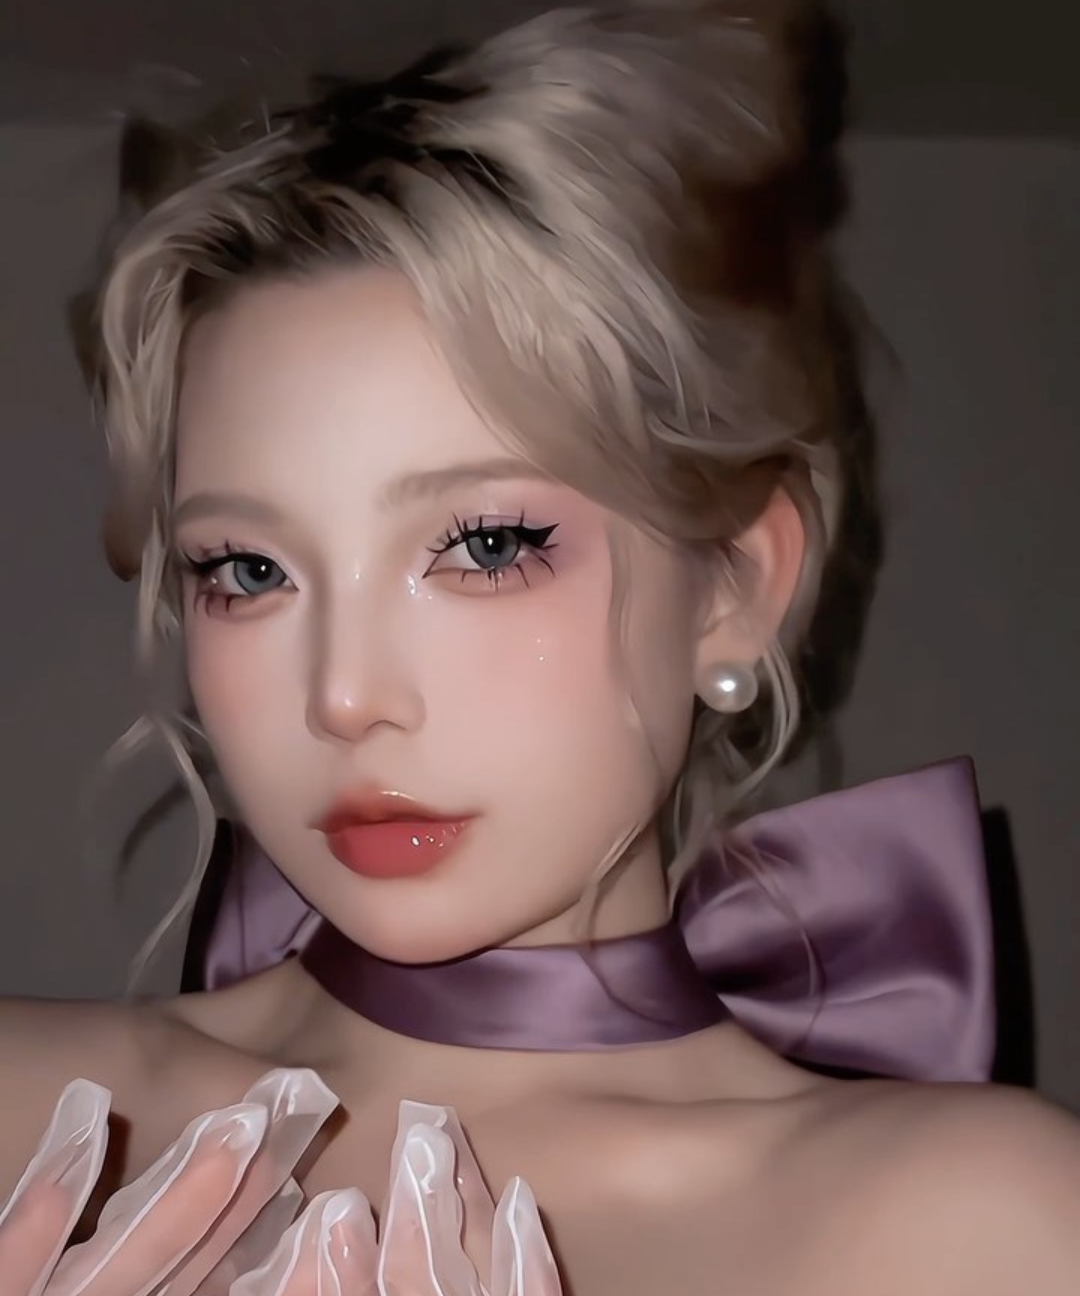 This Douyin Makeup Trend Is Inspired by The Cat From Aristocats